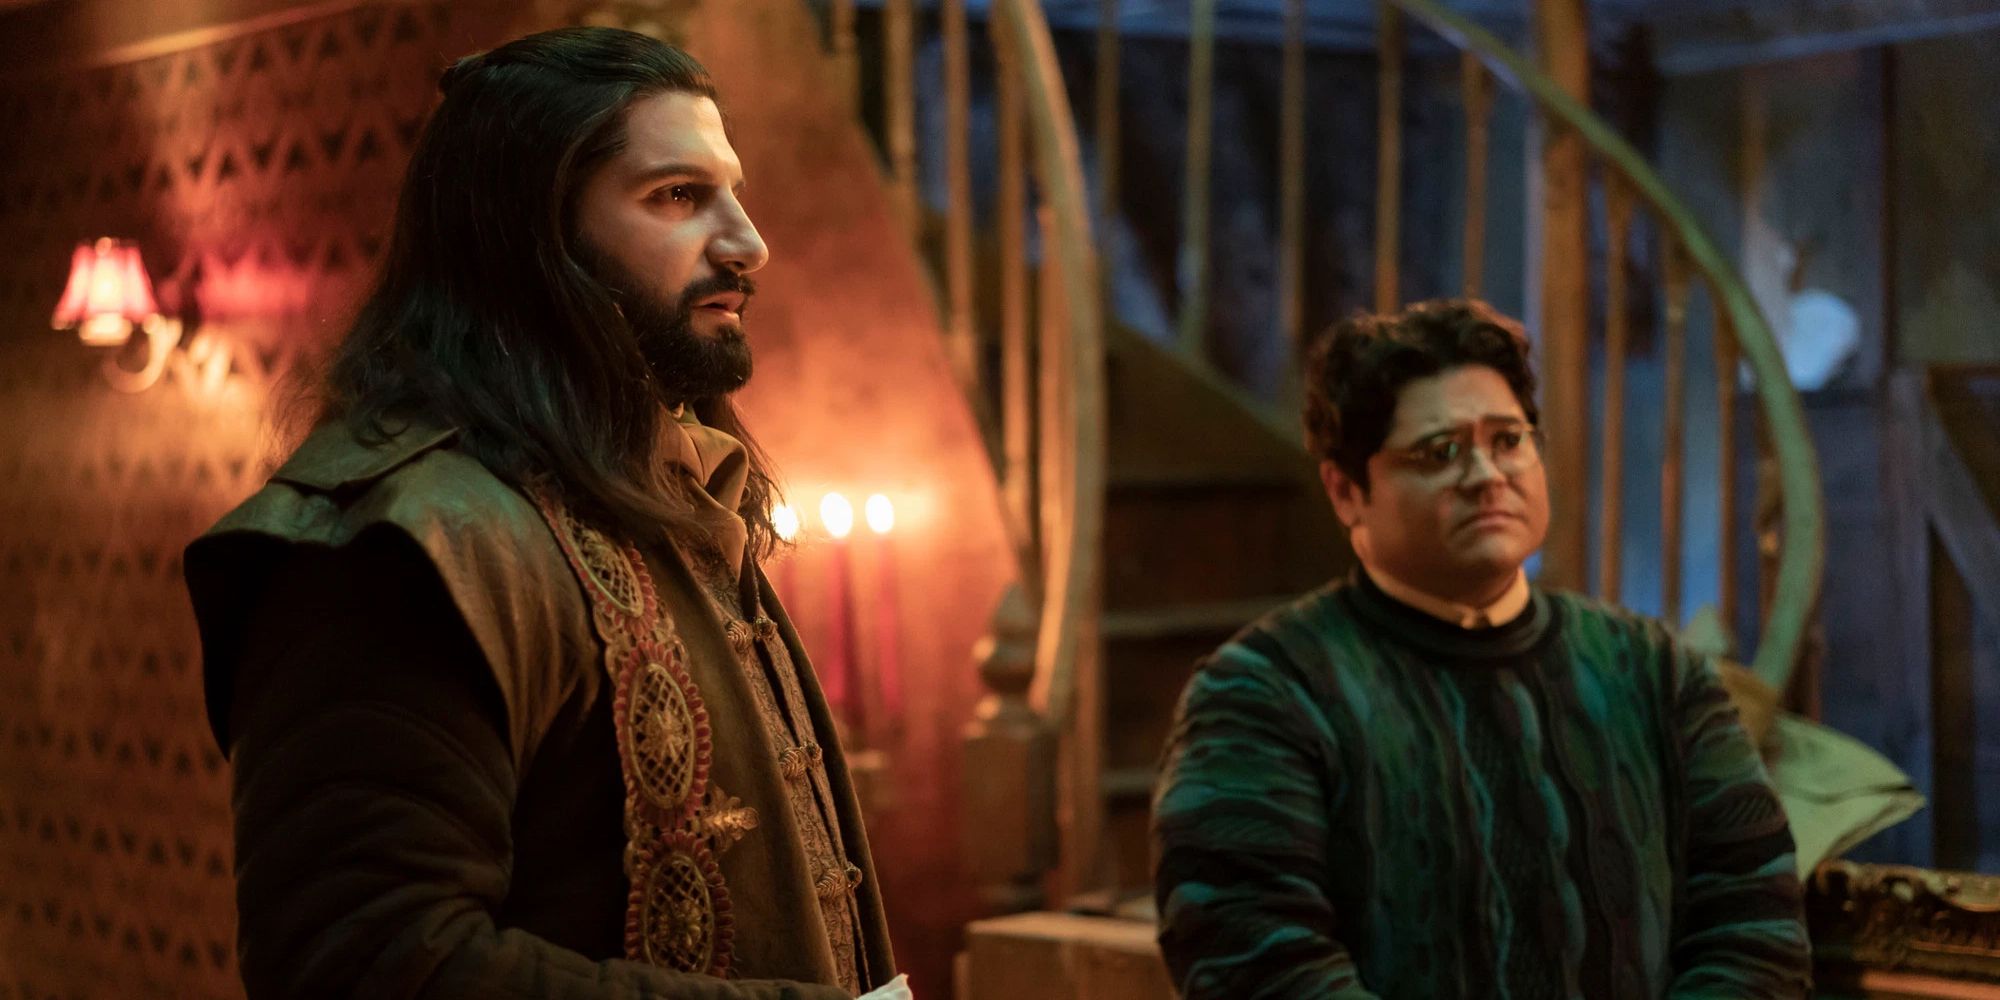 Guillermo and Nandor side by side in What We Do in the Shadows season 3 fx